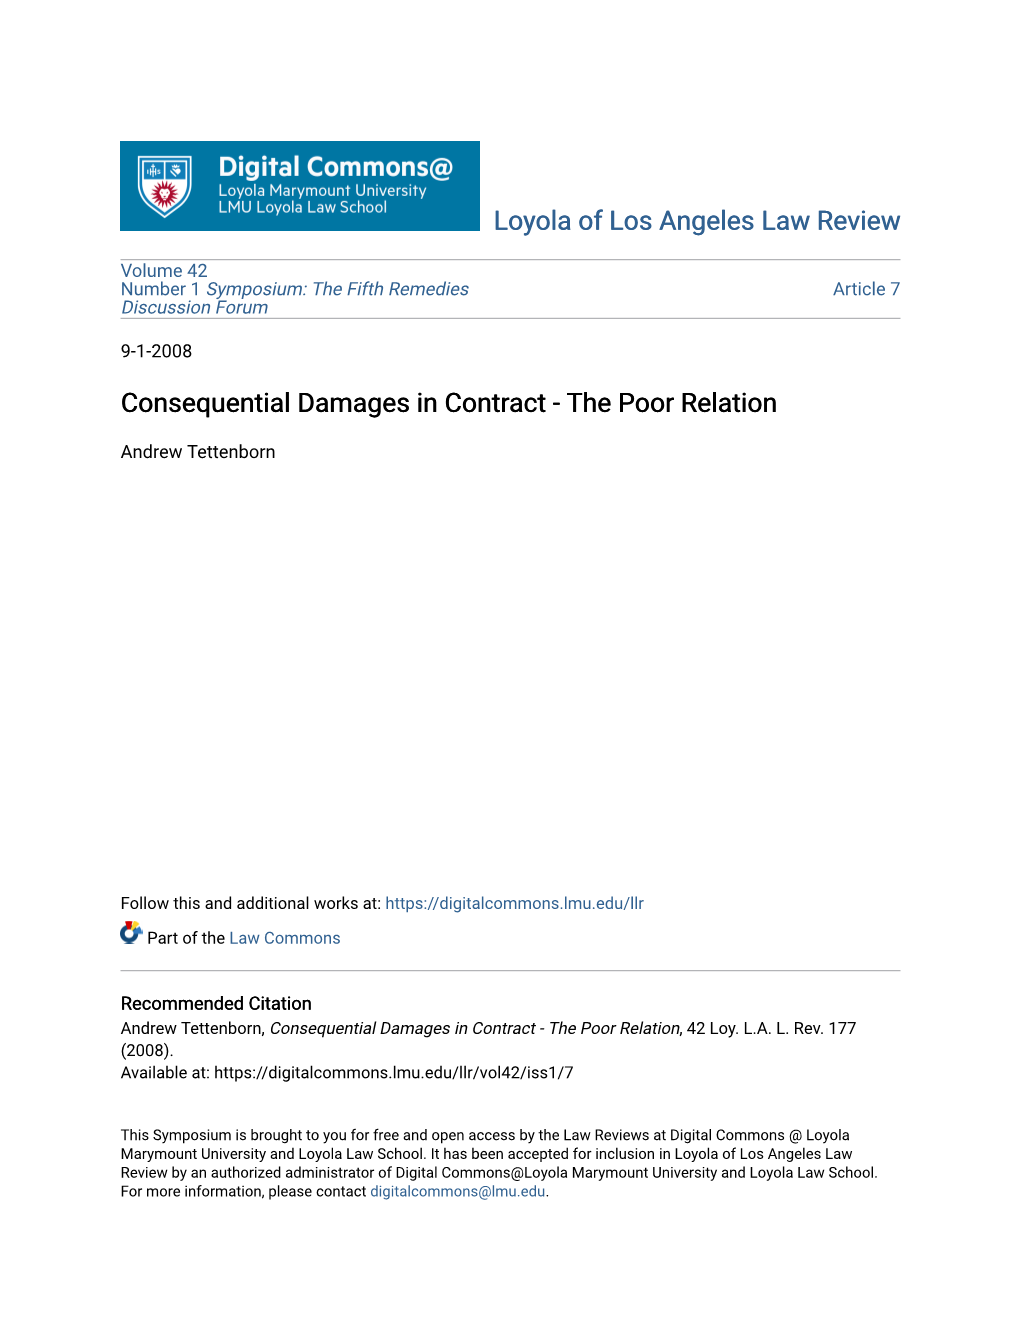 Consequential Damages in Contract - the Poor Relation